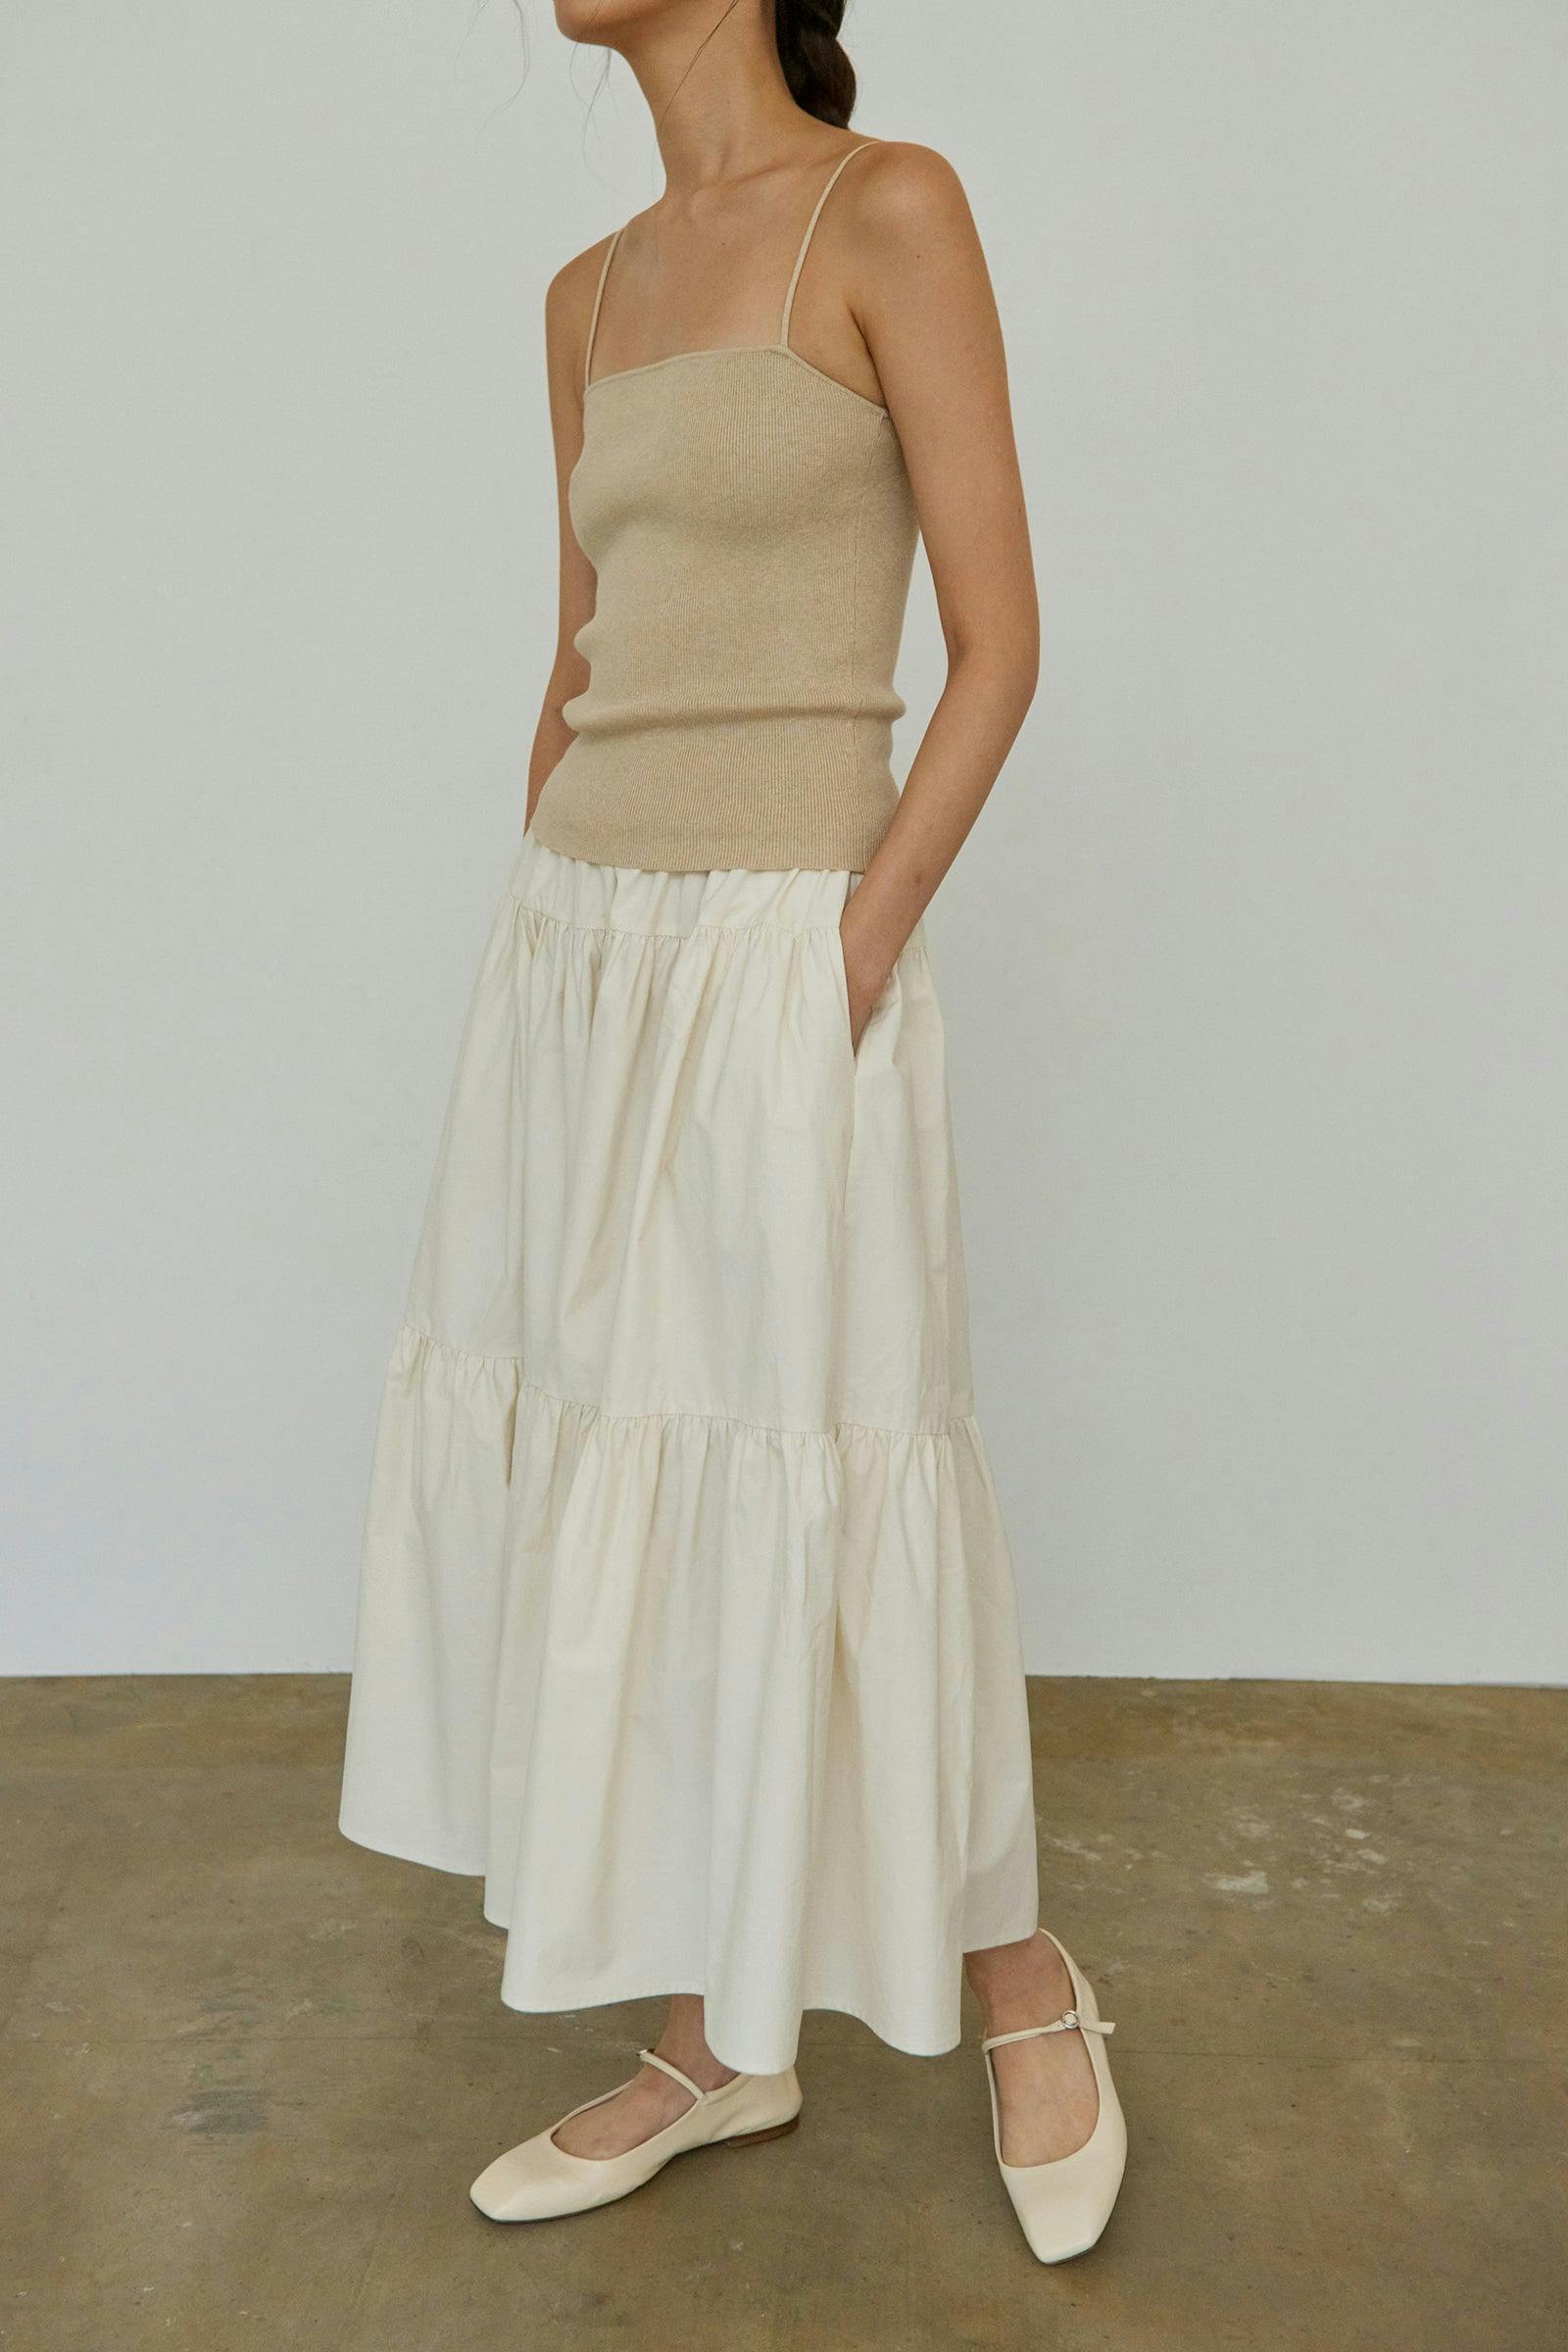 Teacake Skirt | Tiered Flare Skirt in Cream Colour | Something to Hold